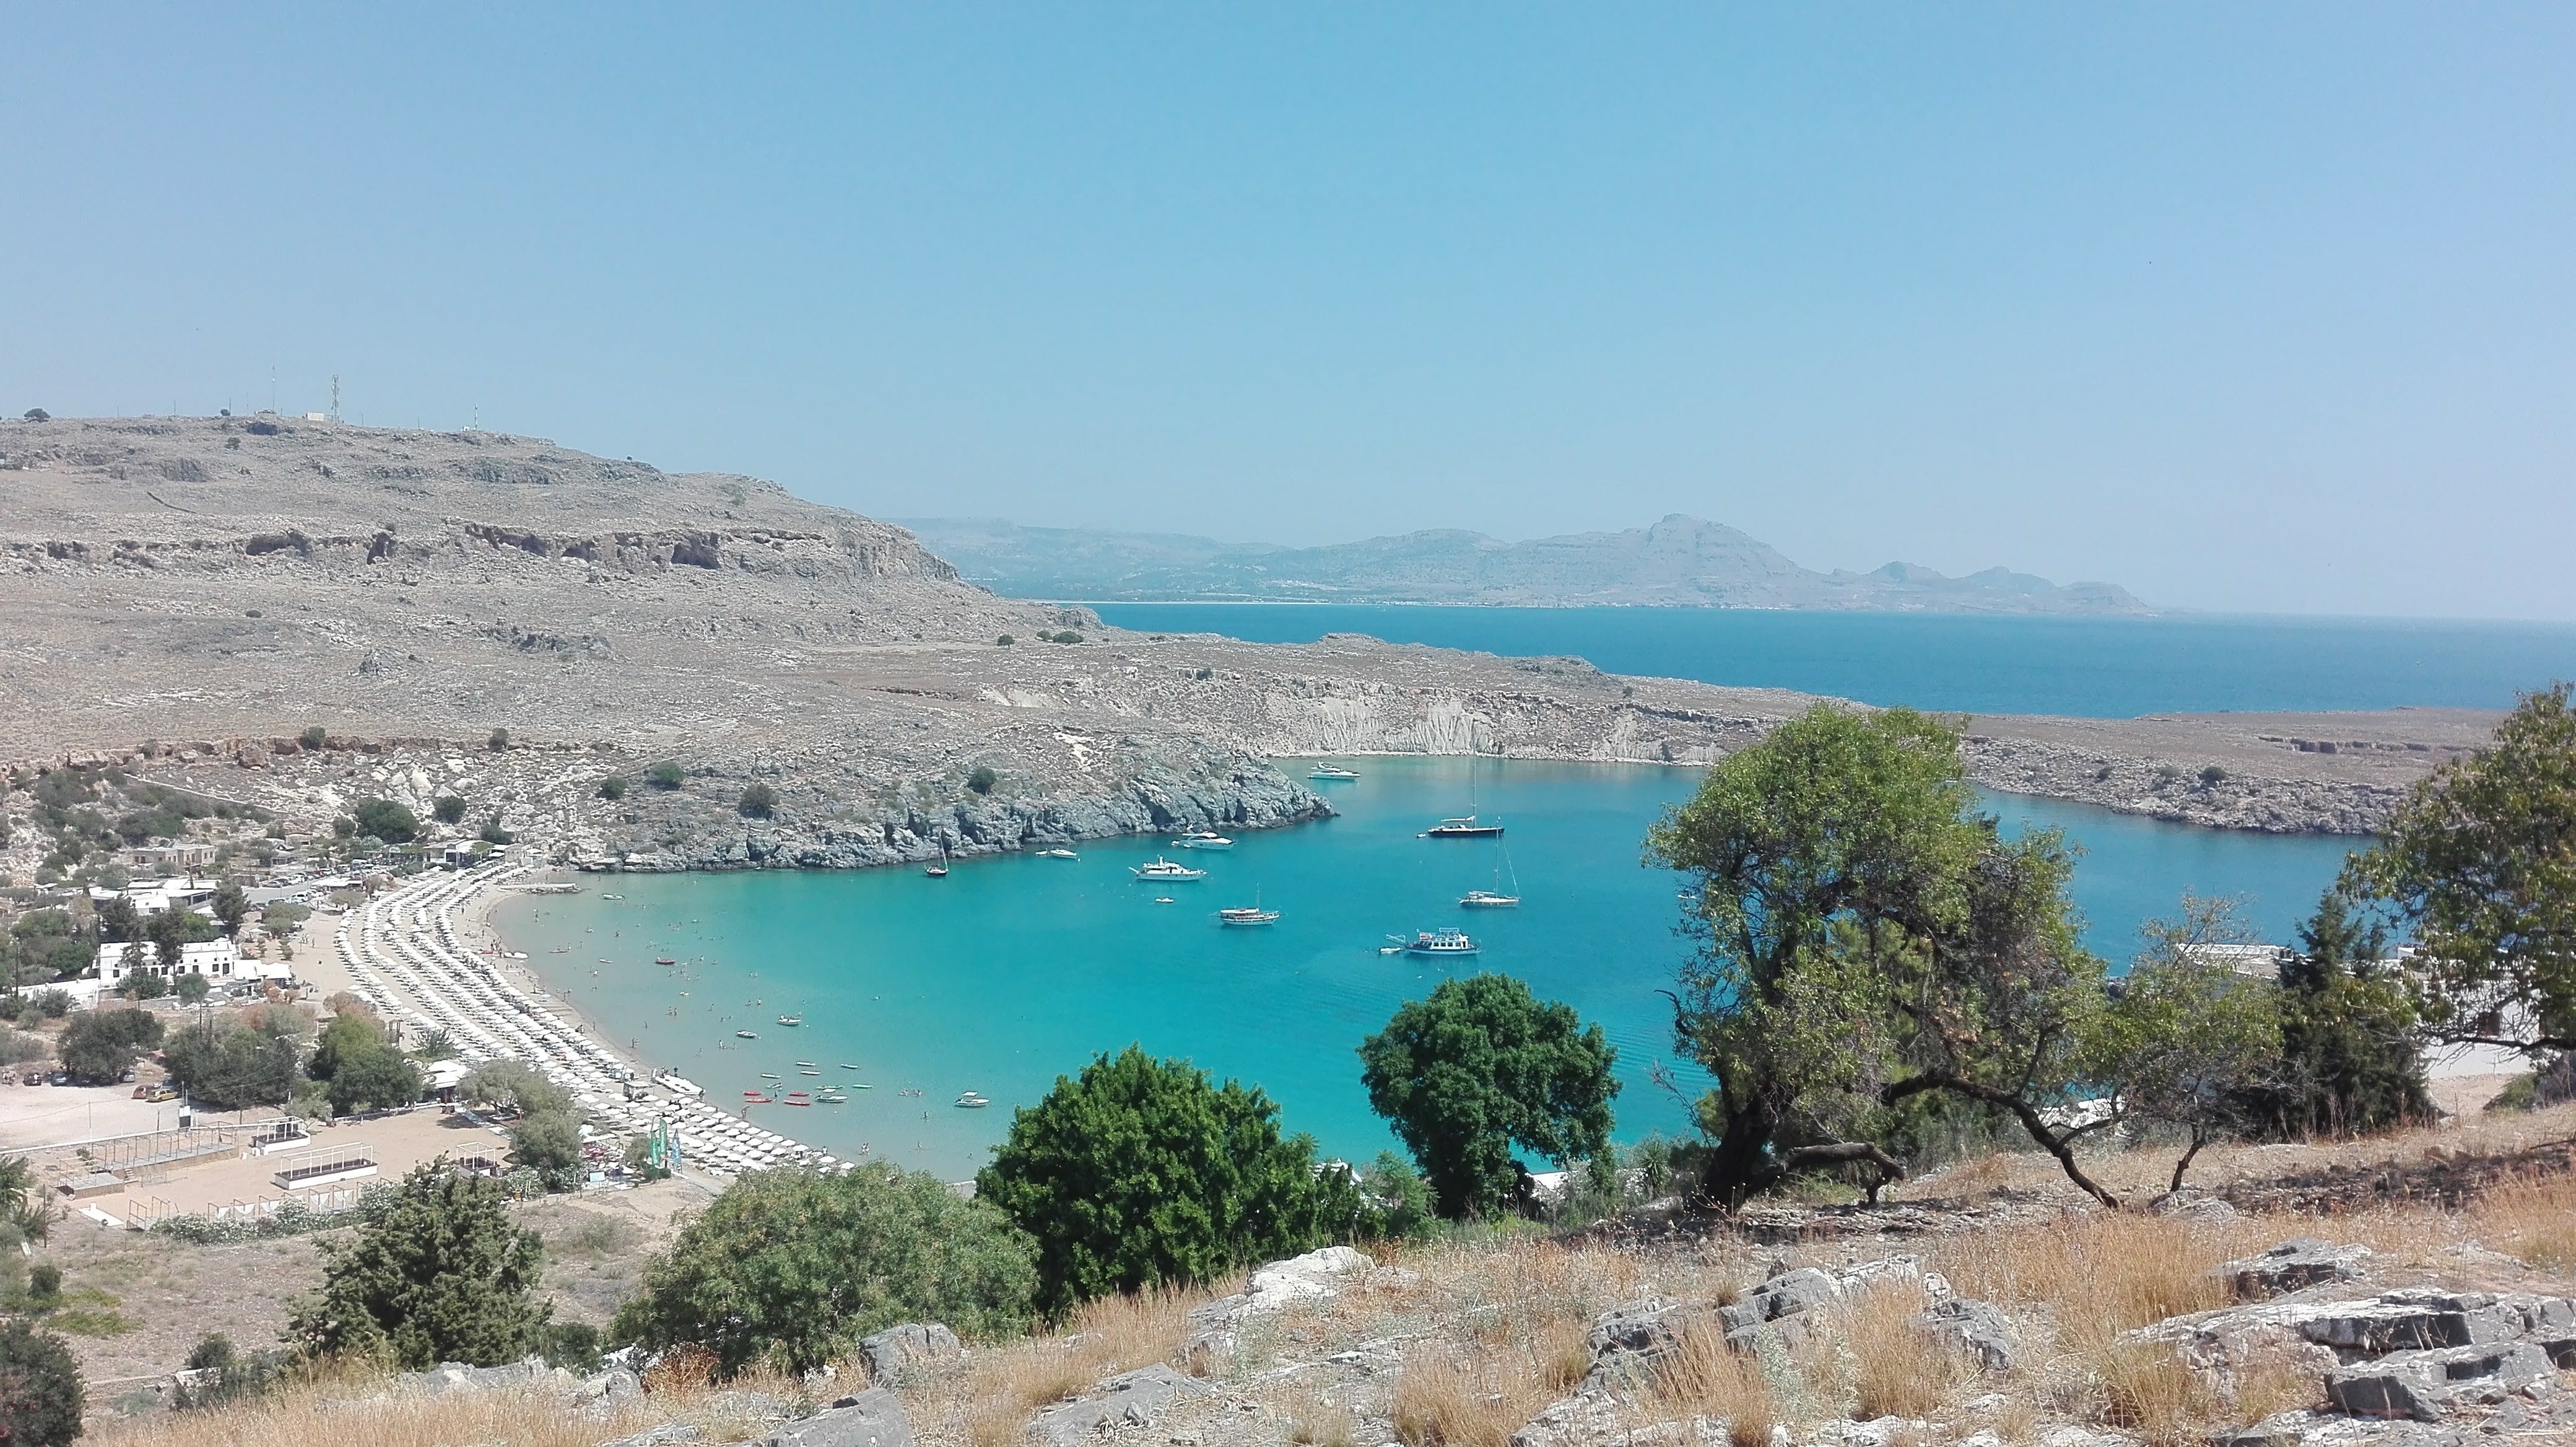 Walking up to the Acropolis of Lindos, with a wonderful view on one of the beaches